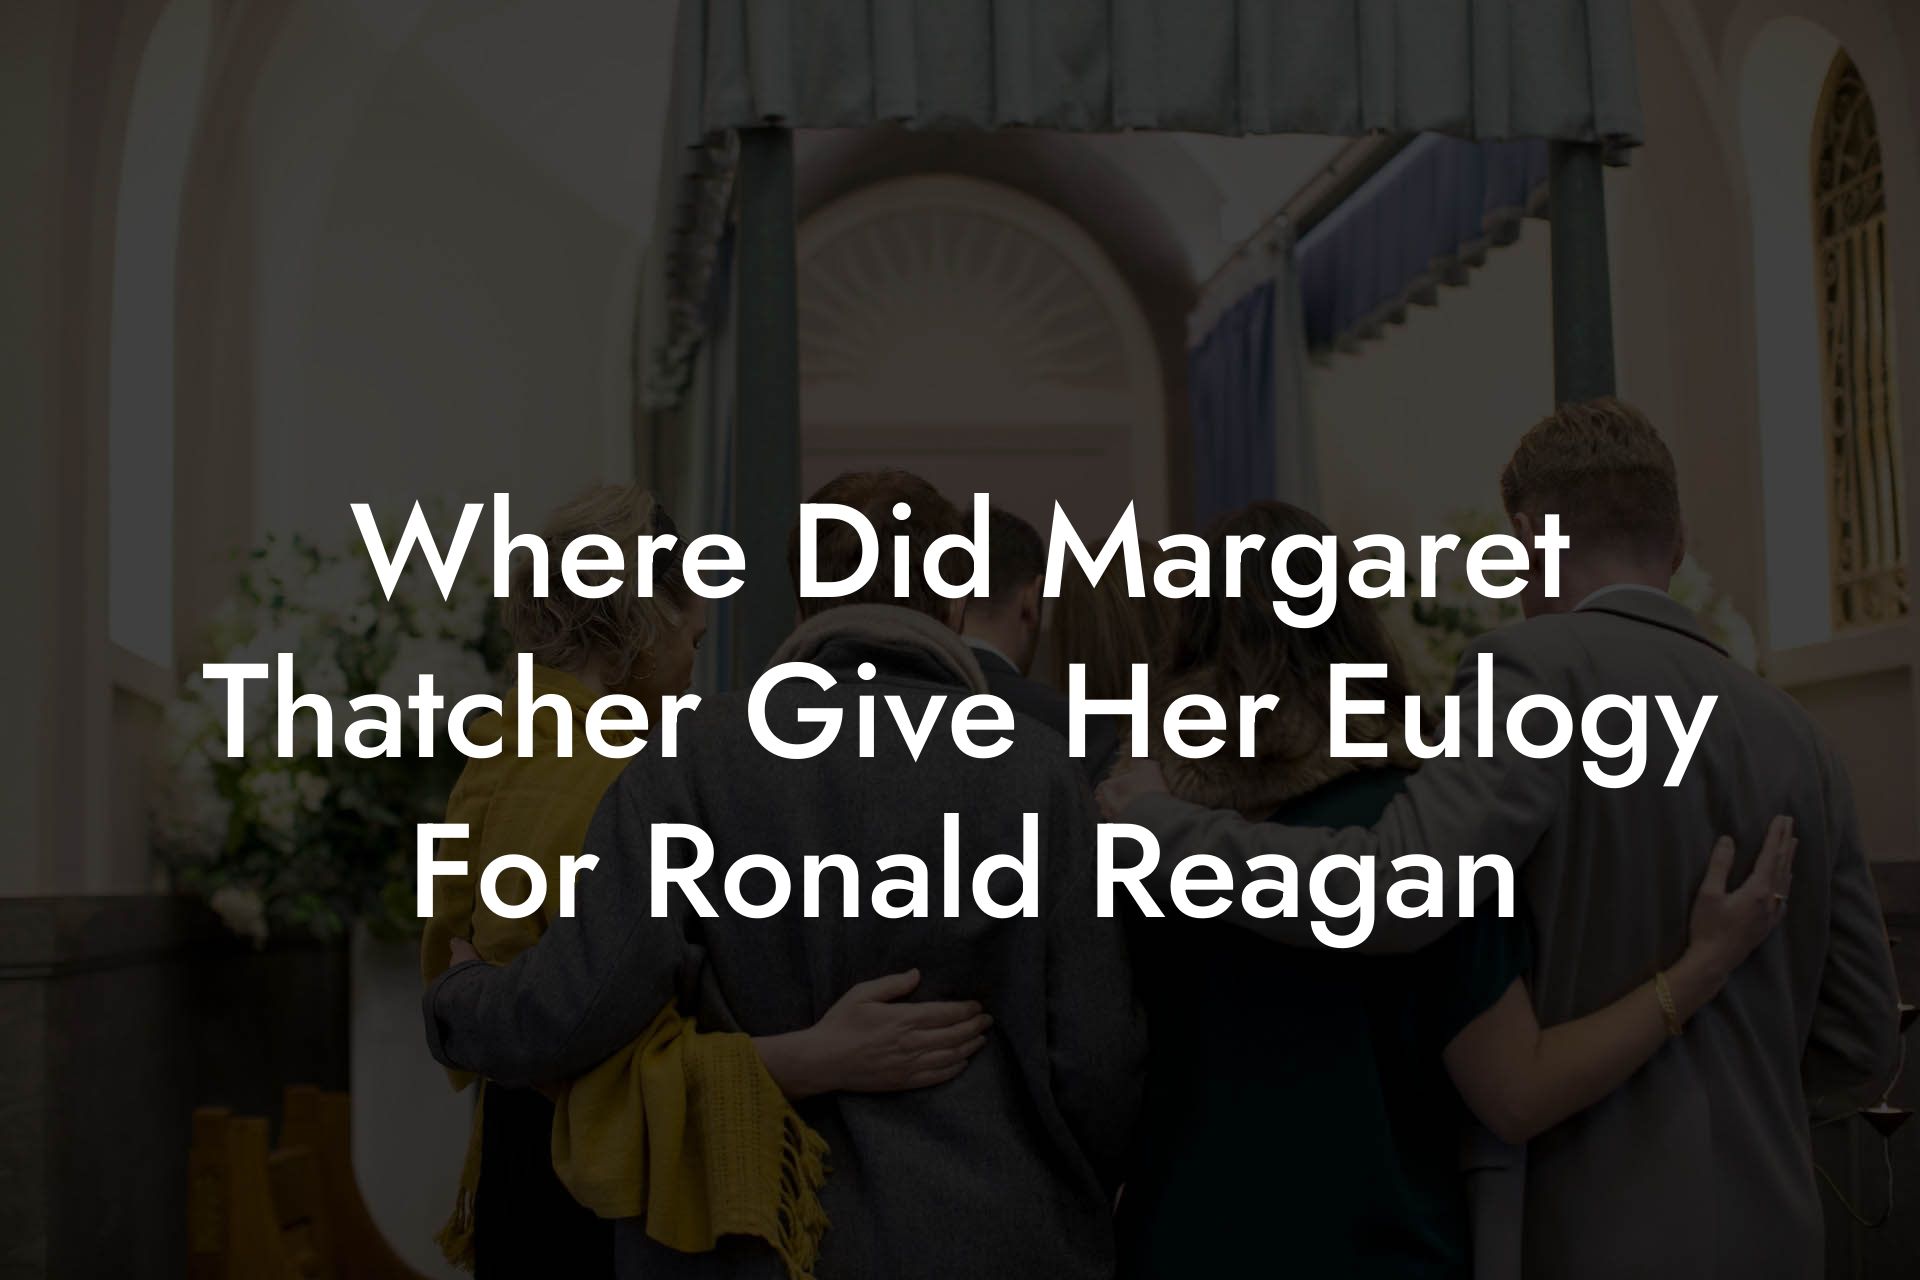 Where Did Margaret Thatcher Give Her Eulogy For Ronald Reagan